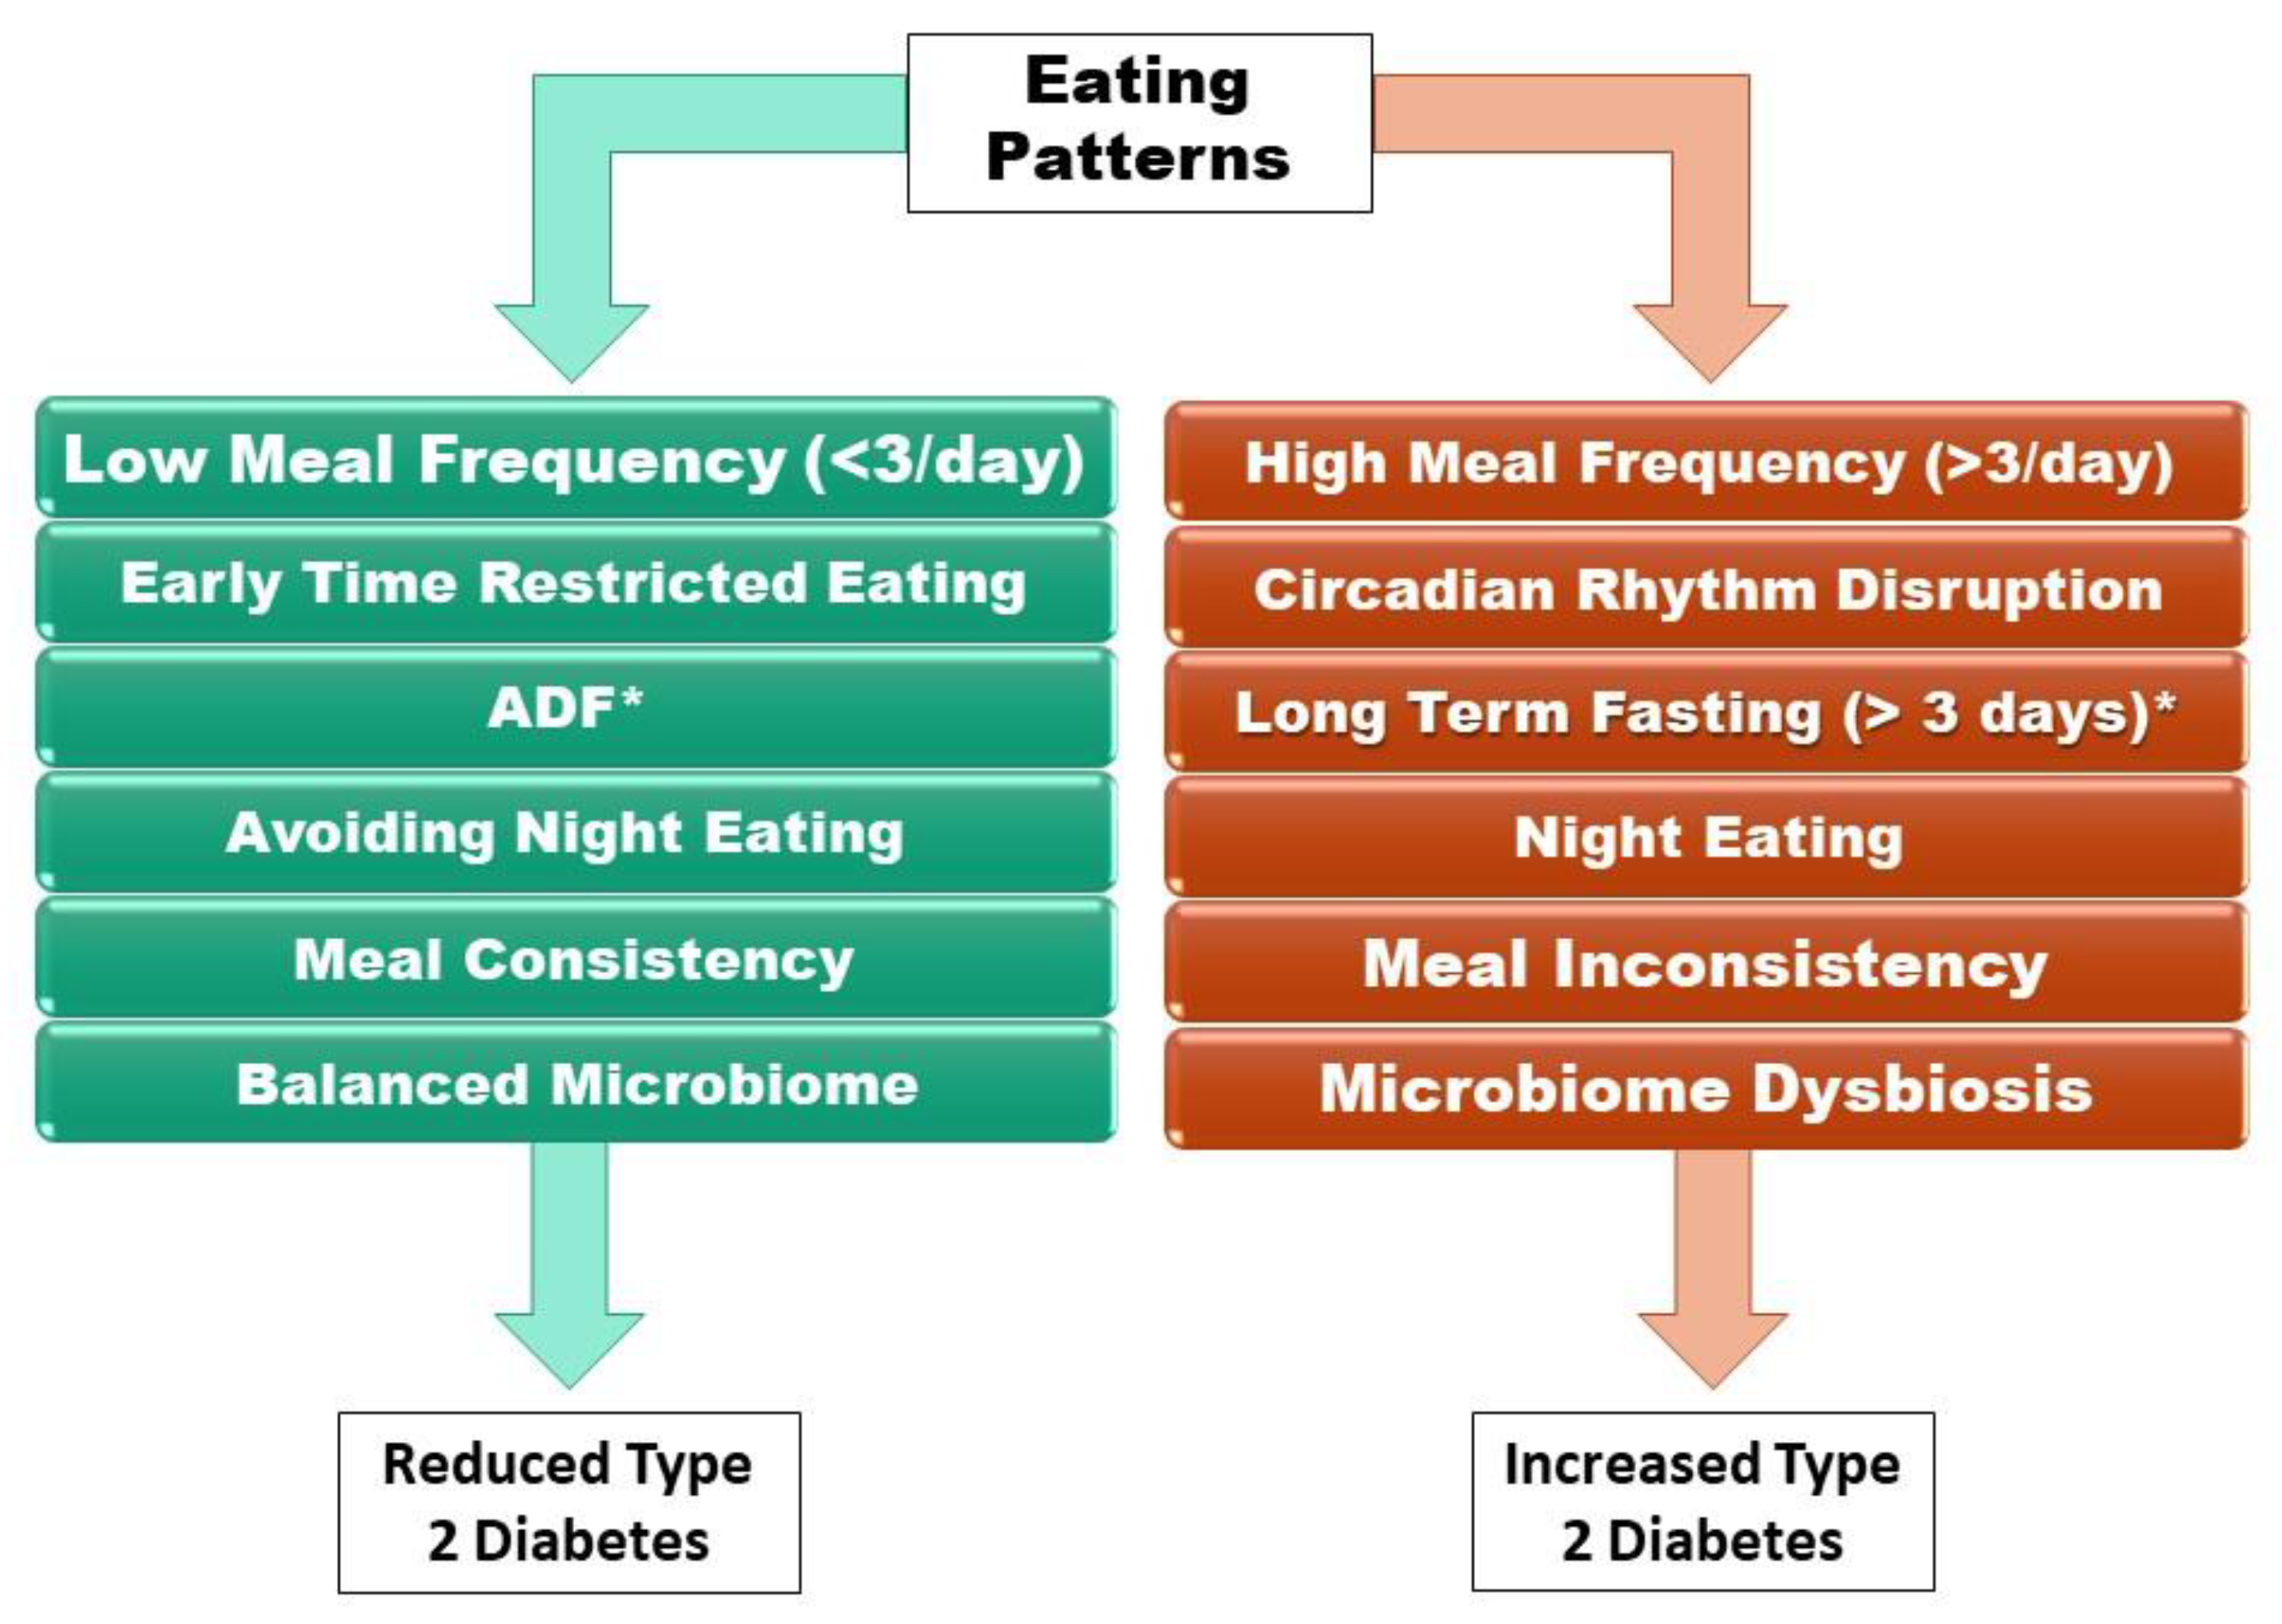 Consistent eating patterns